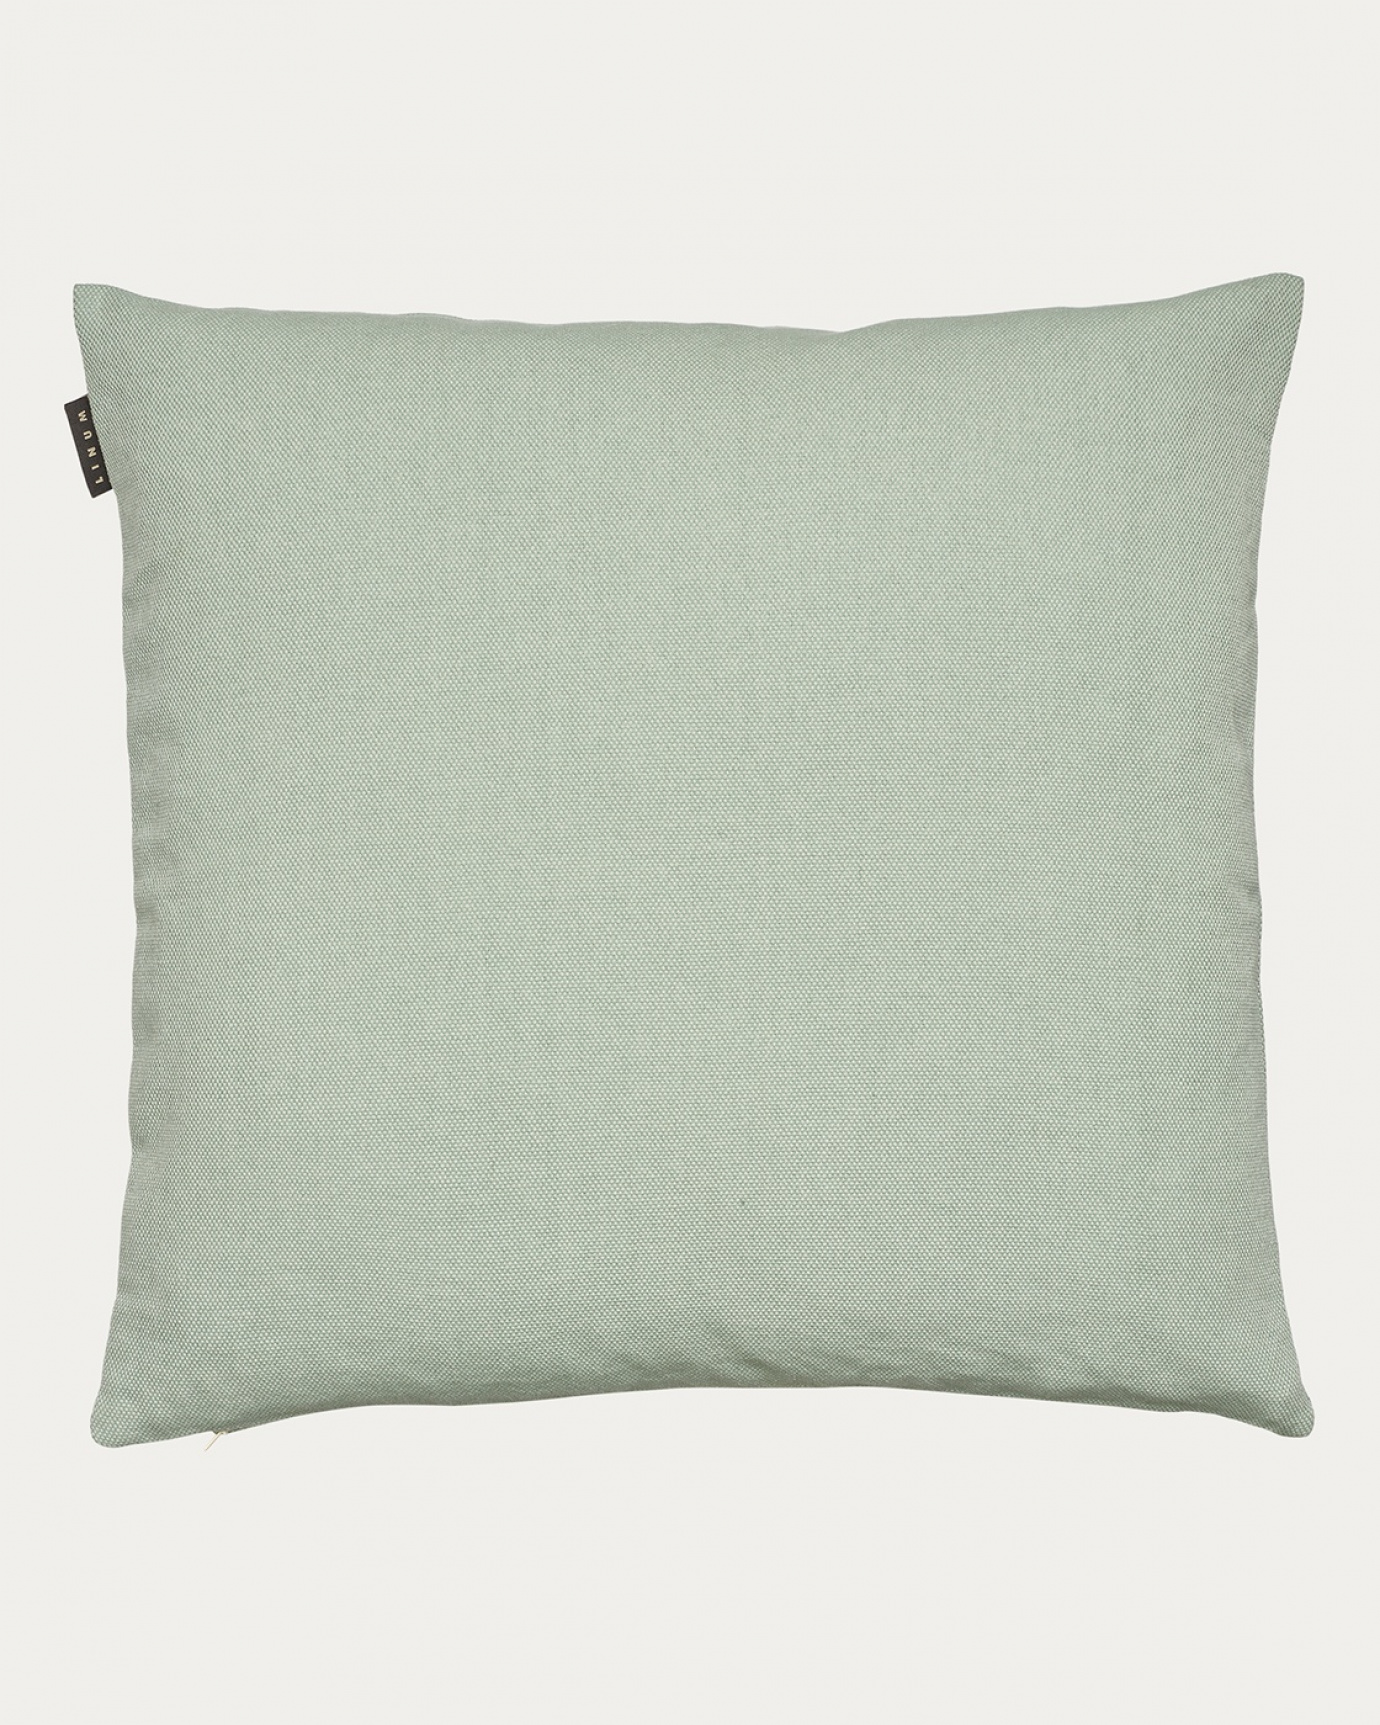 Product image light ice green PEPPER cushion cover made of soft cotton from LINUM DESIGN. Easy to wash and durable for generations. Size 60x60 cm.